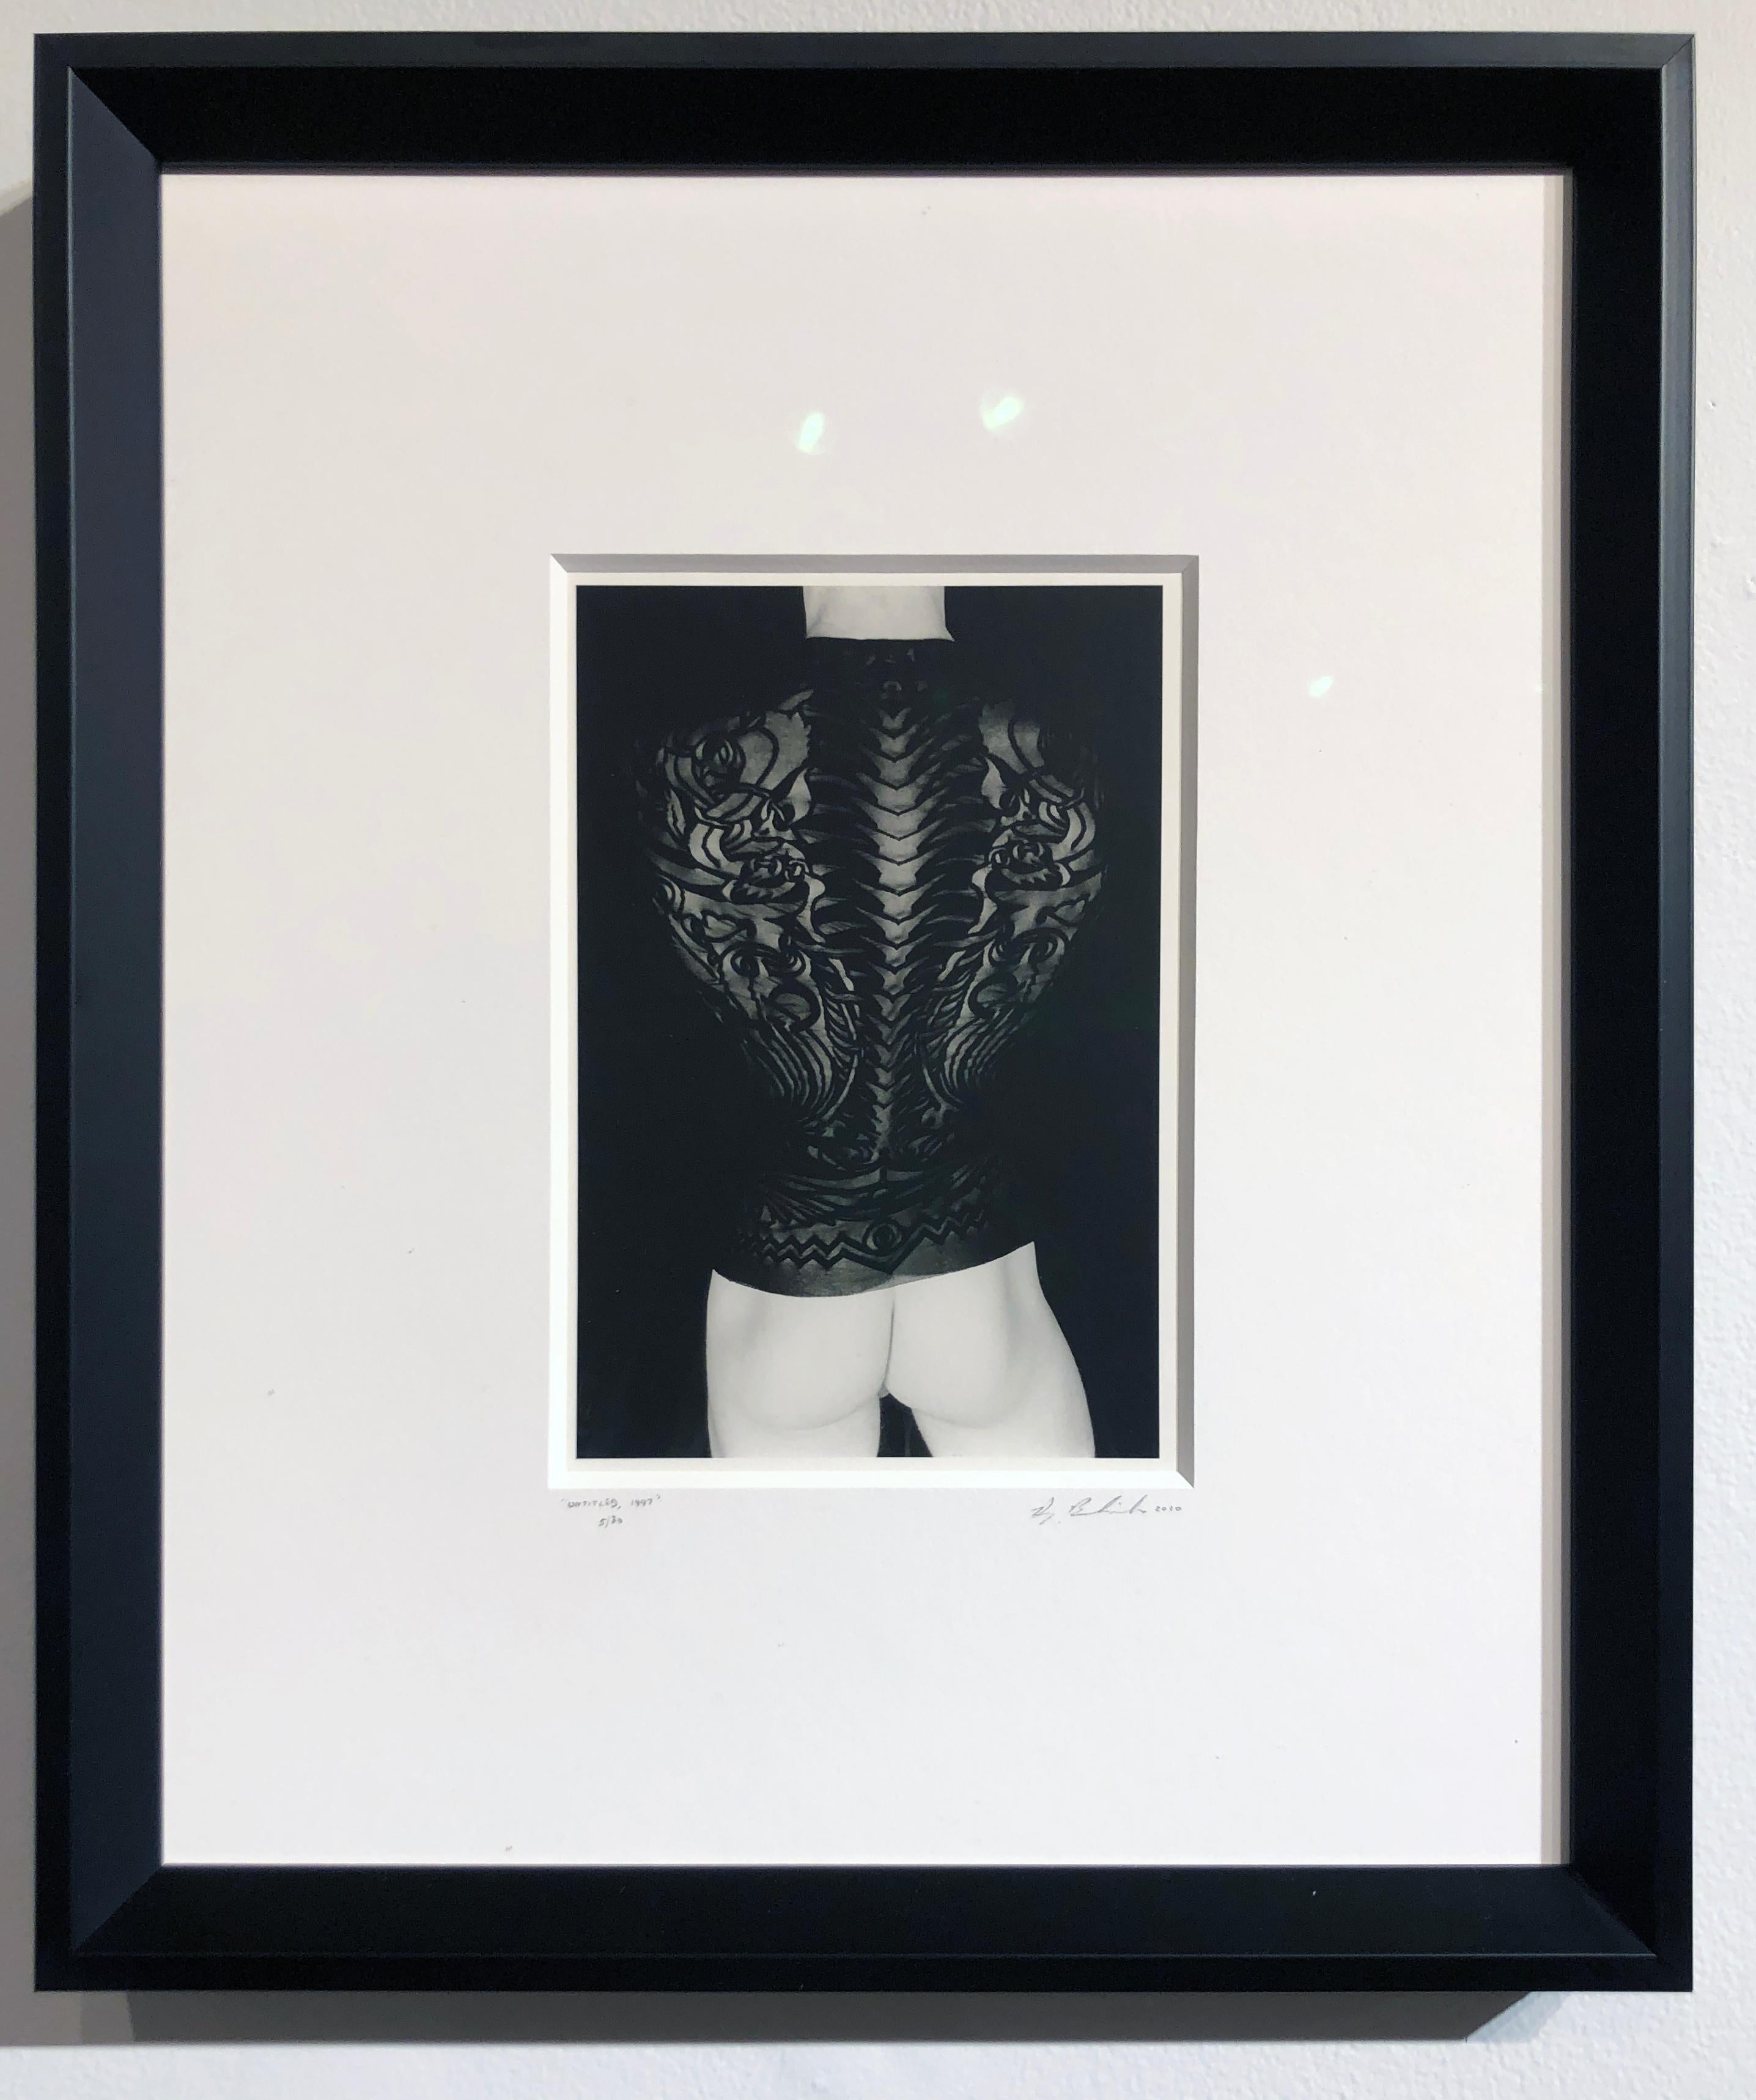 Untitled 1997 - Erotic Nude Photo with Figure in Jean Paul Gauthier Tattoo Shirt - Contemporary Photograph by Doug Birkenheuer